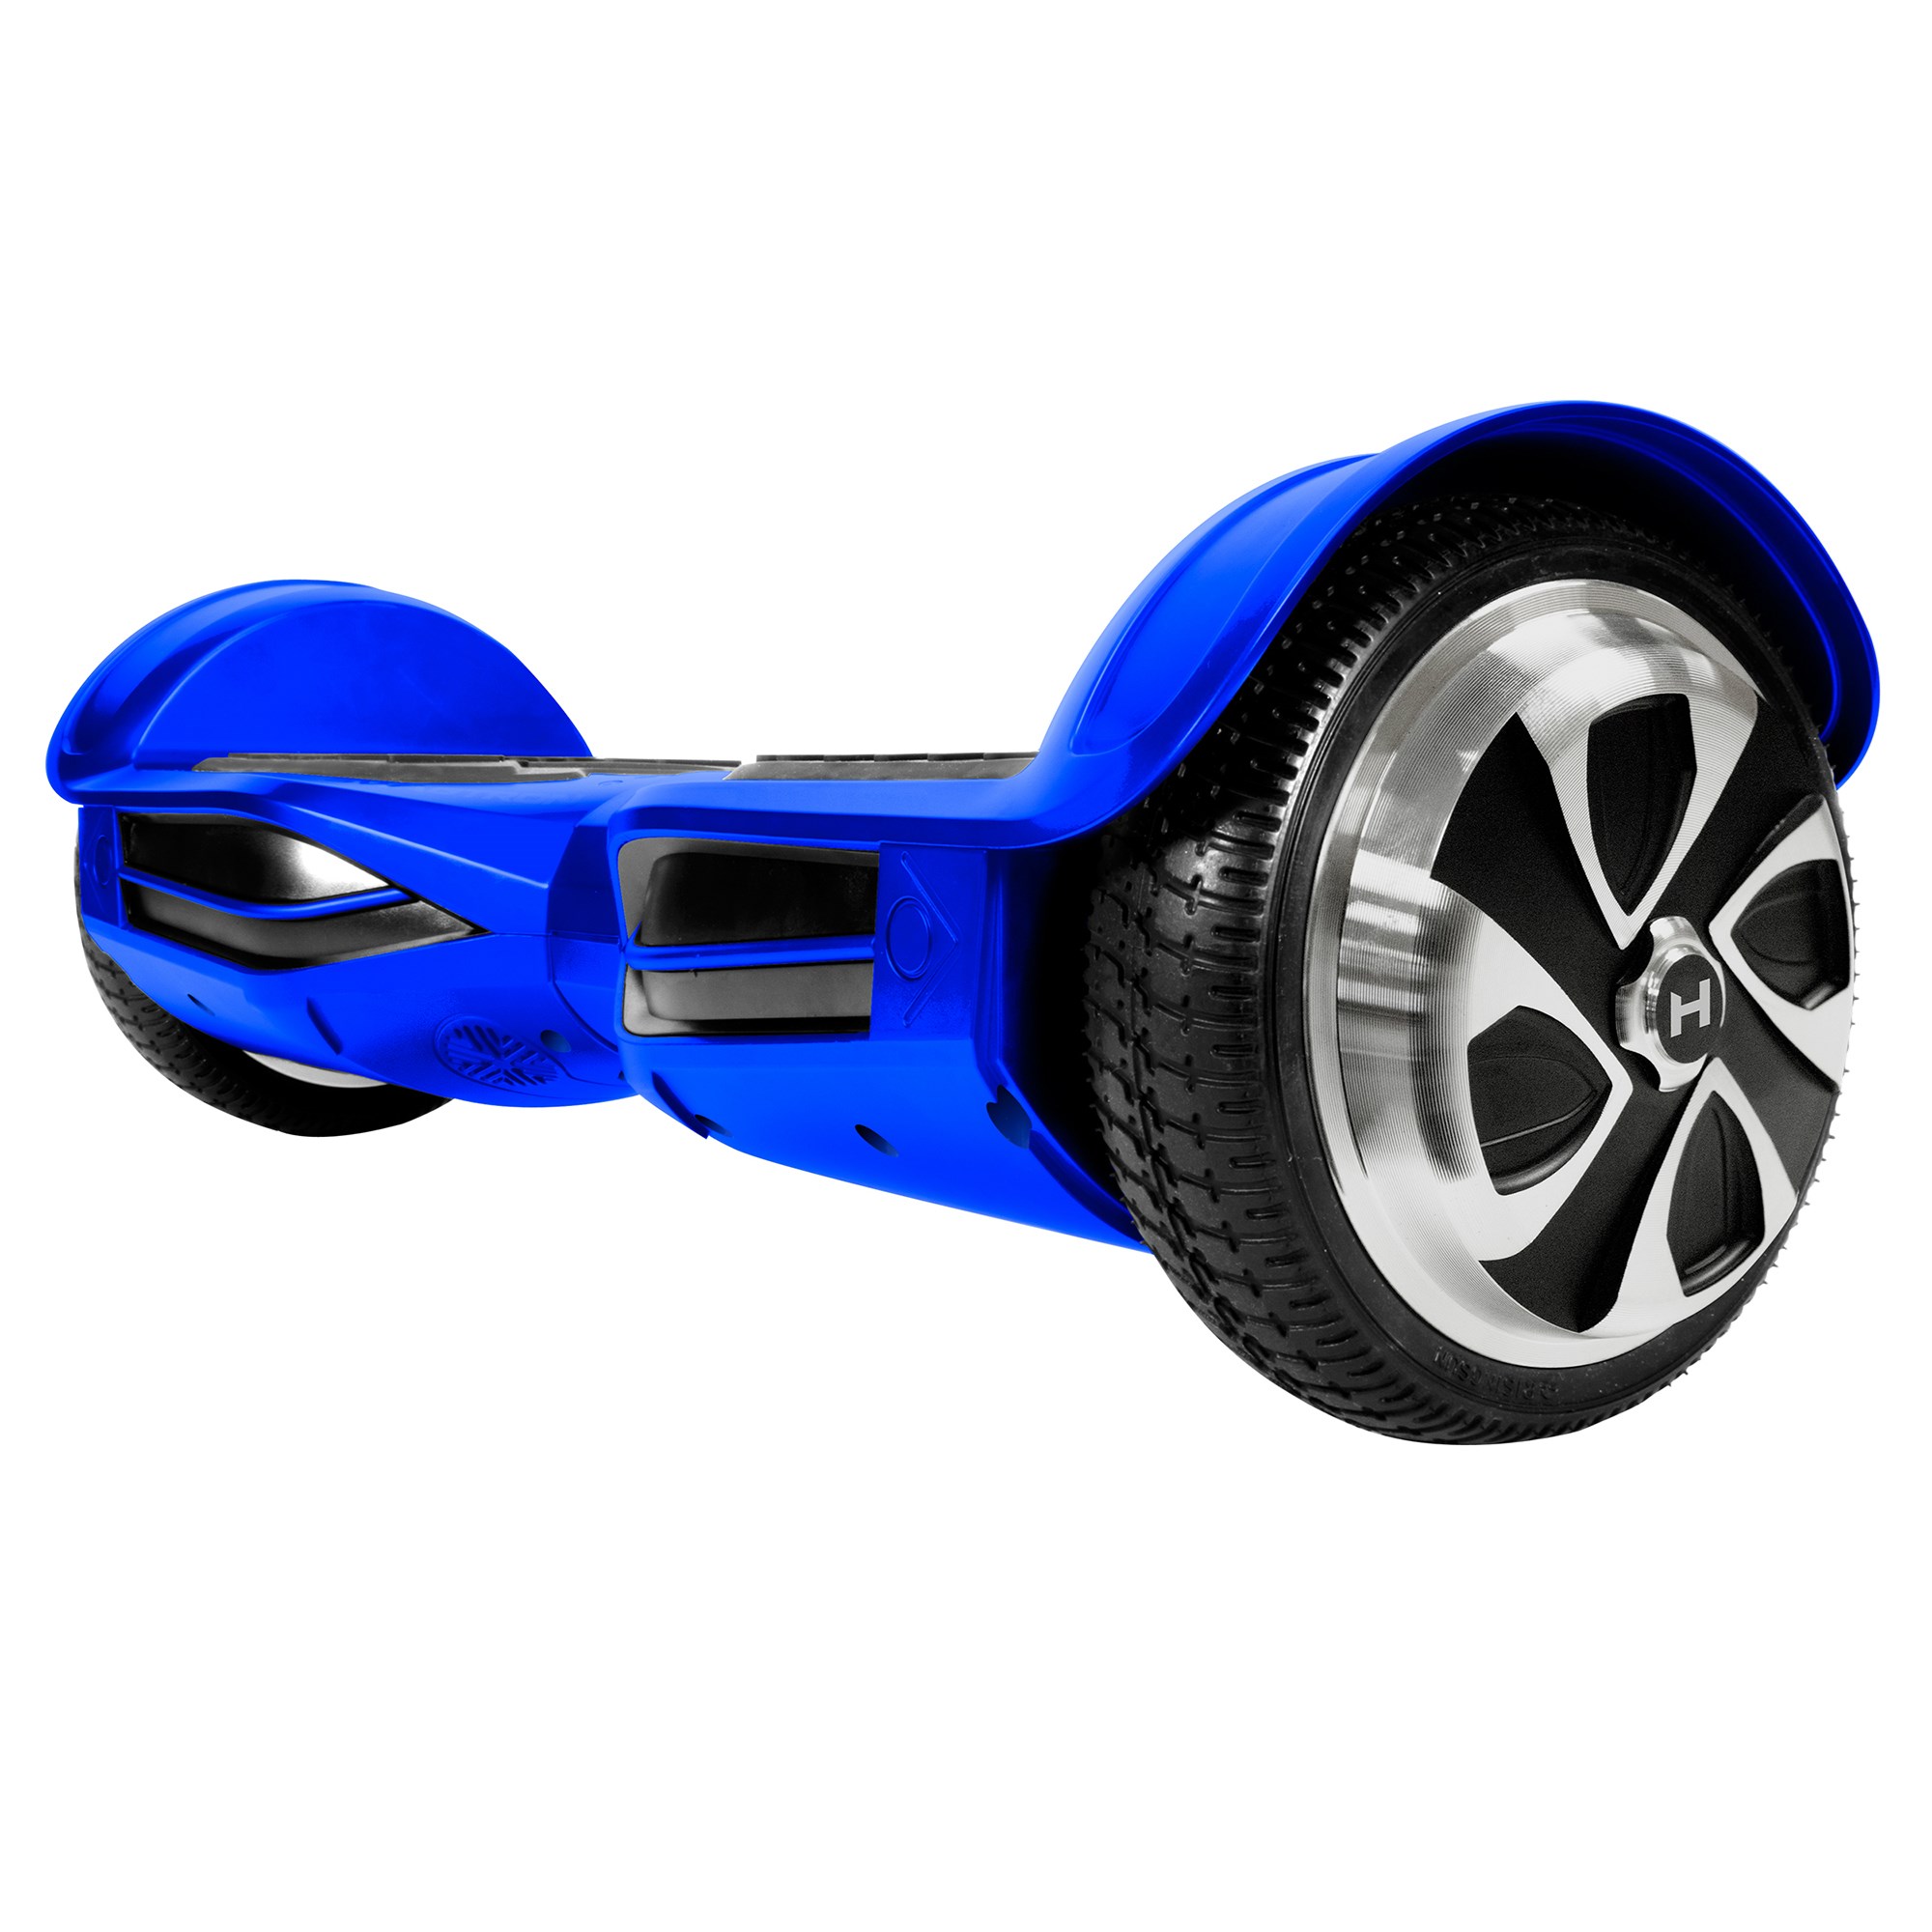 Hoverzone Hoverboard XLS - blue